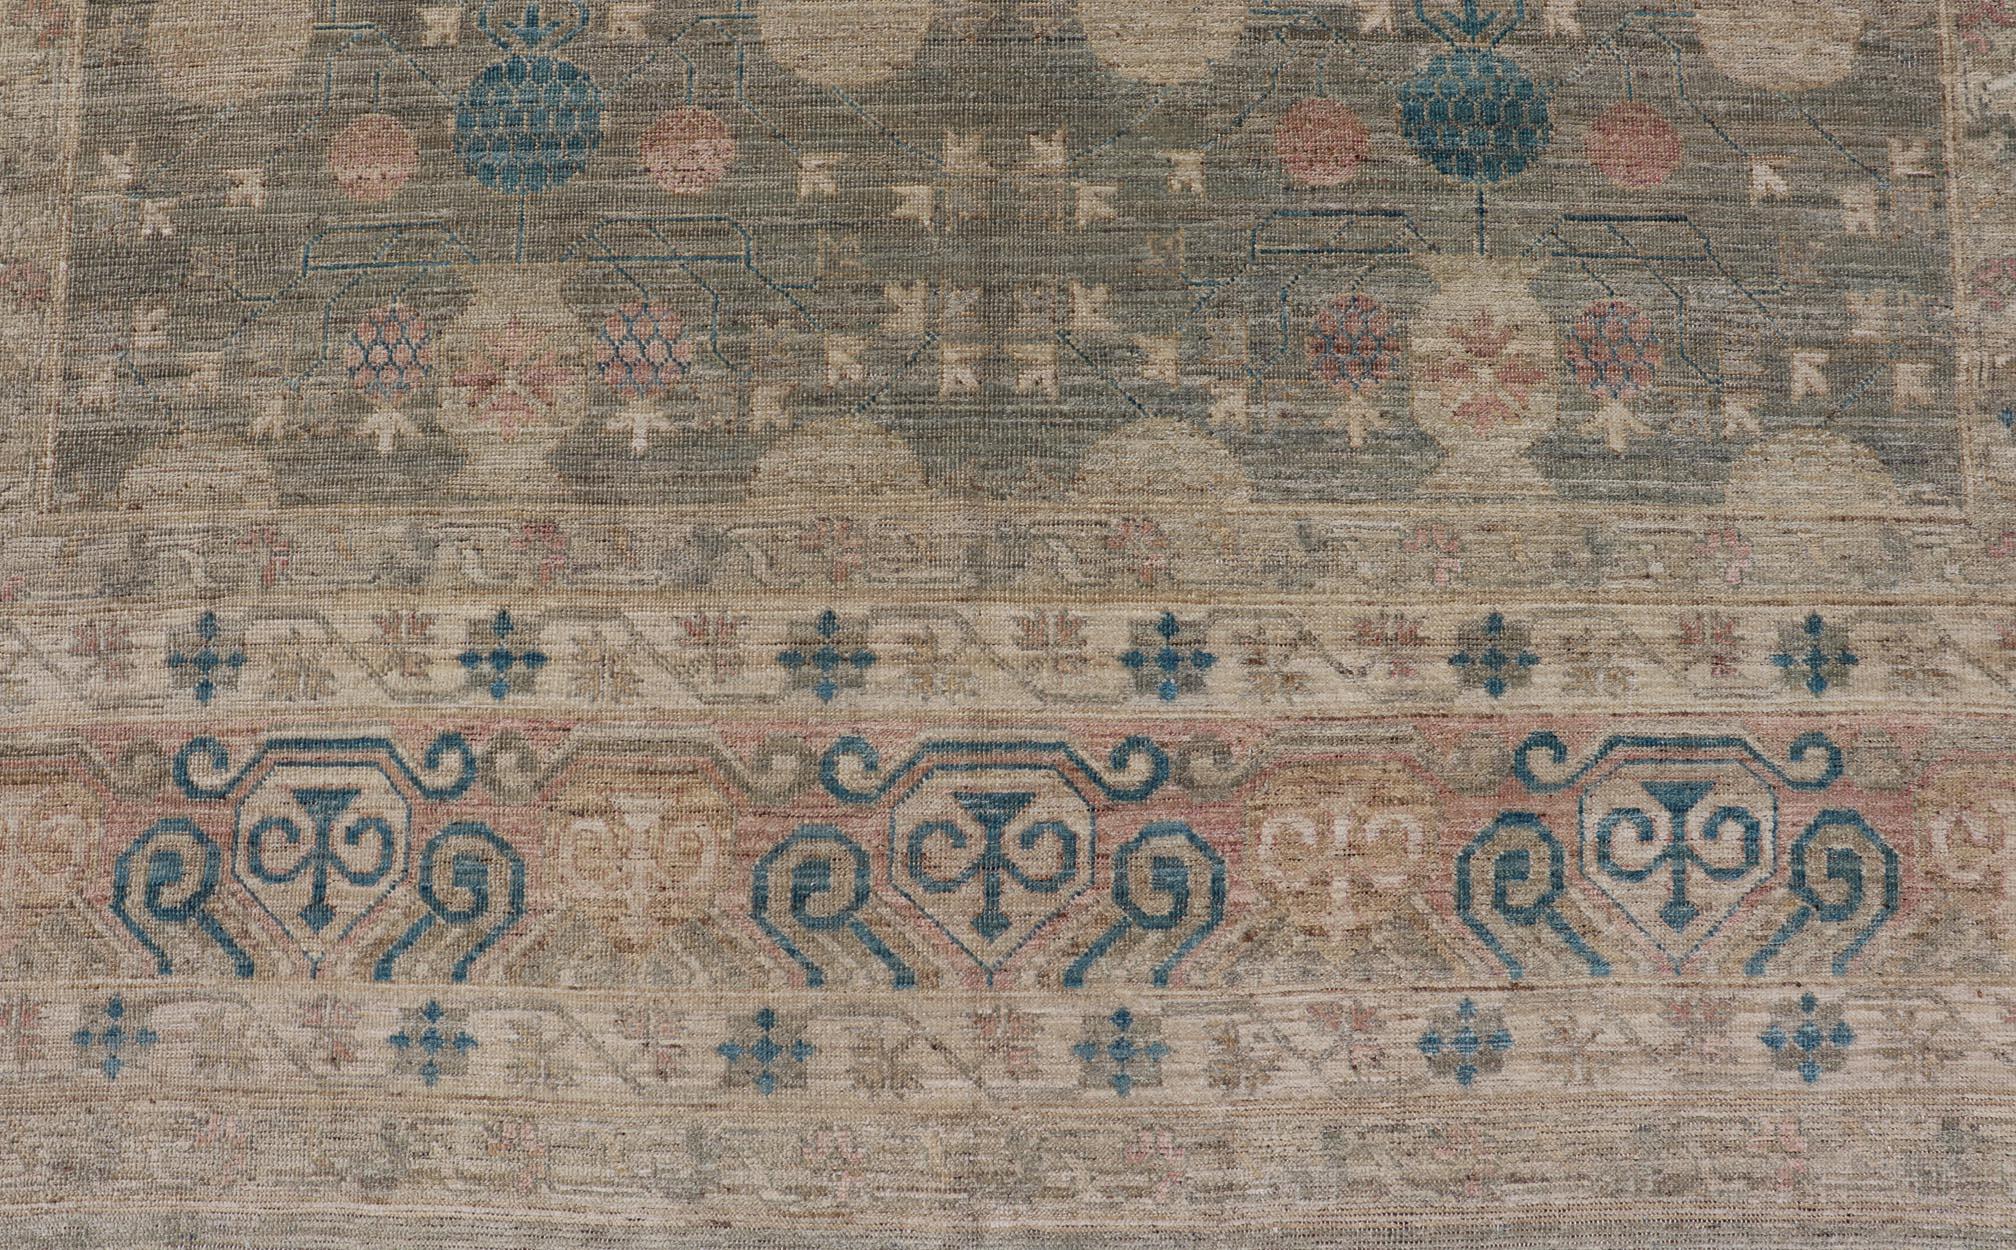 Large Modern Tribal Khotan Rug in Shades of Cream, Green, Blue, and Coral. Keivan Woven Arts Country of origin; Afghanistan Type: Khotan Keivan Woven Arts; rug AWR-17257, early 21st century. 
Measures: 10'5 x 13'8 
This modern Khotan features a